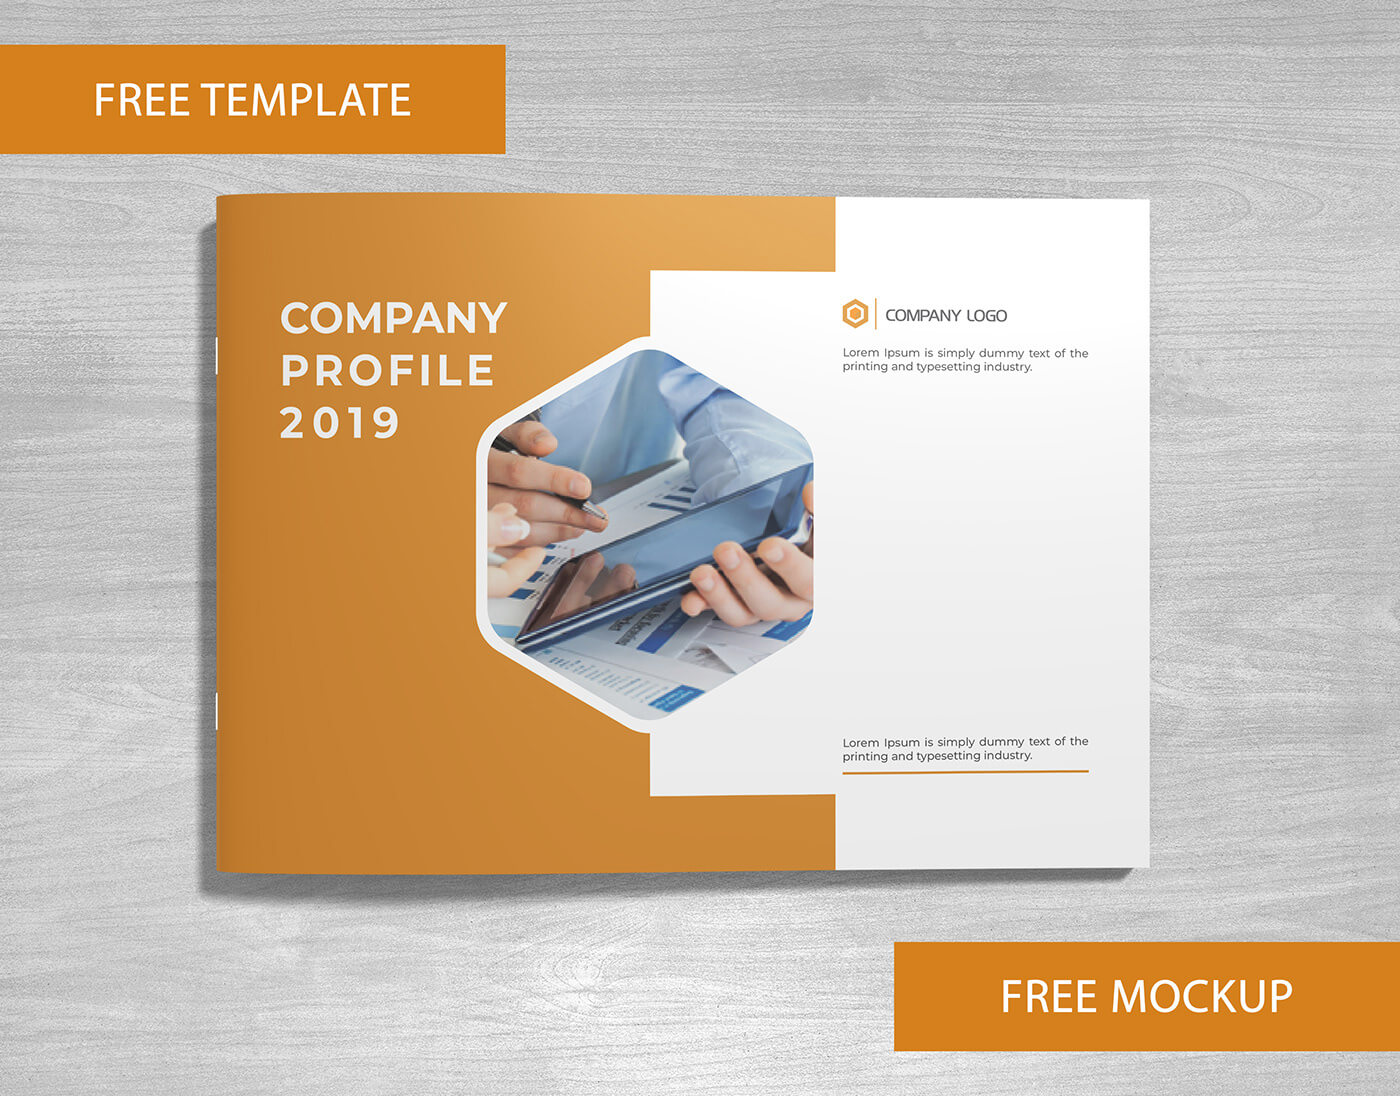 Company Profile Free Template And Mockup Download On Behance Intended For Creative Brochure Templates Free Download